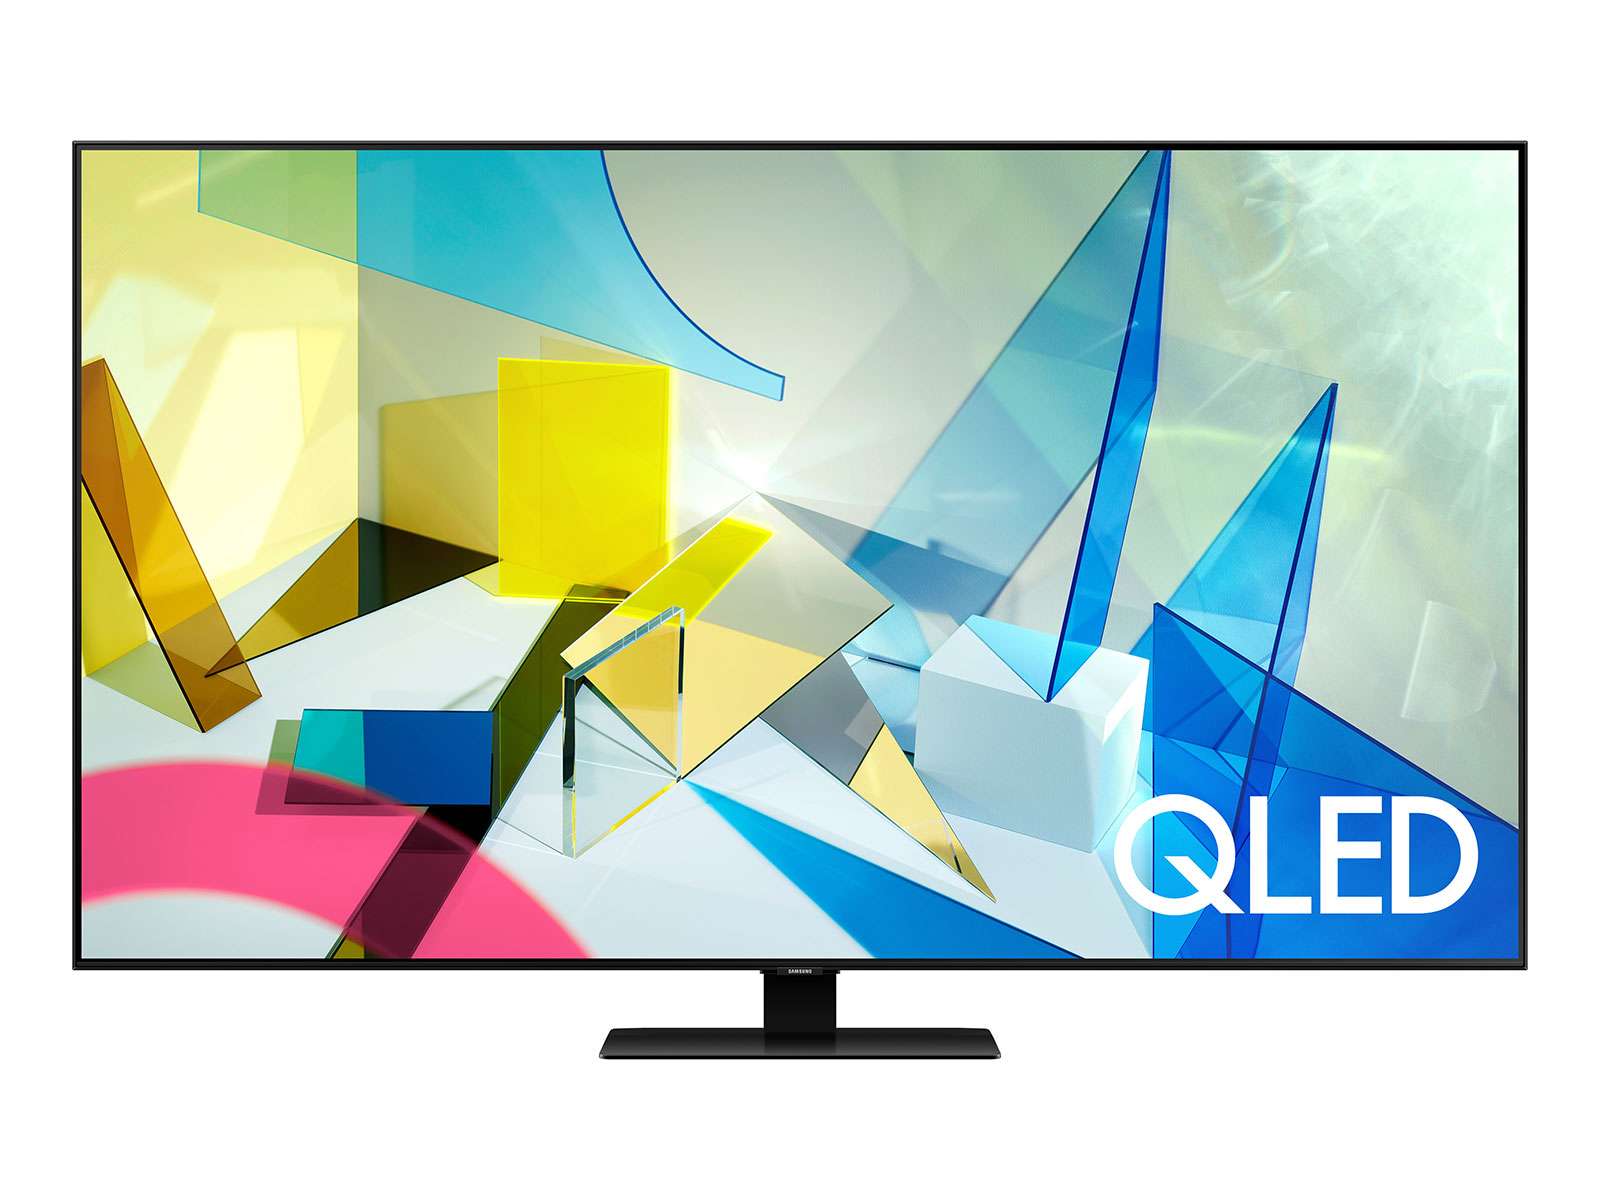 https://image-us.samsung.com/SamsungUS/home/televisions-and-home-theater/tvs/qled-tvs/pdp/q80t-series/gallery/01-Gallery-PDP-Q80T-QN65Q80TAF-Front2-black.jpg?$product-details-jpg$